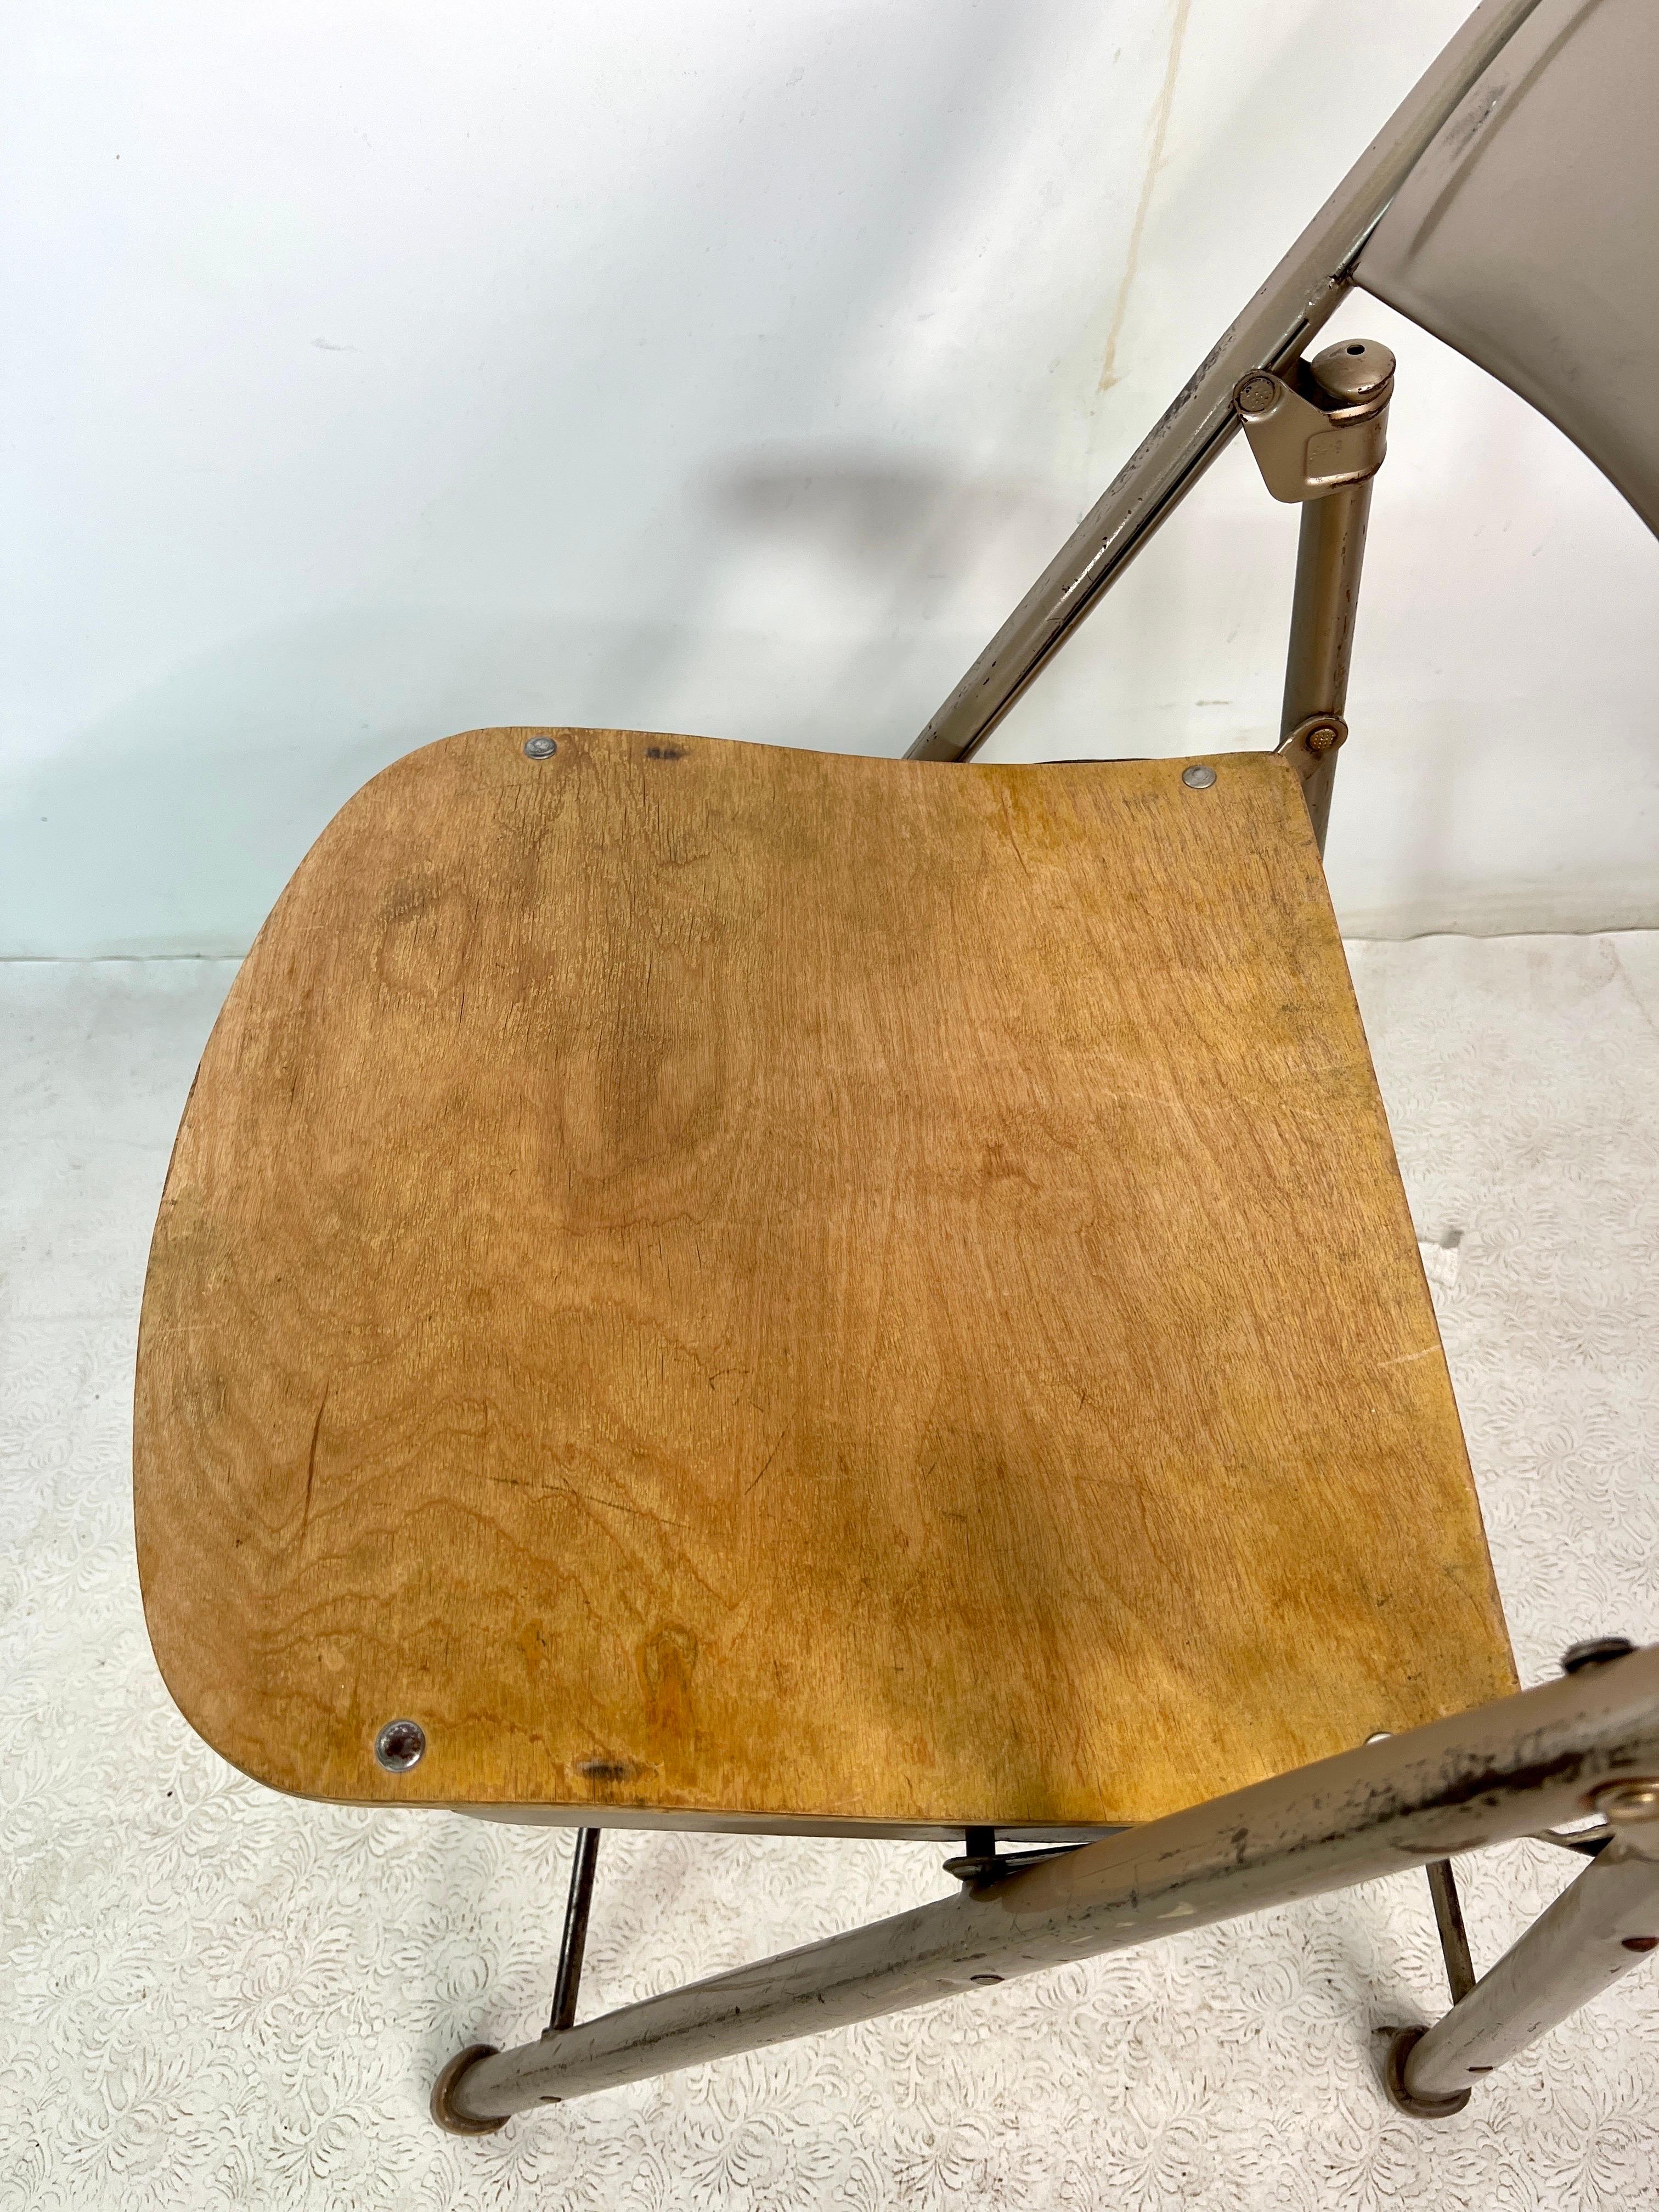 Midcentury American Seating Metal Folding Chair Curved Plywood Seat In Good Condition For Sale In Esperance, NY